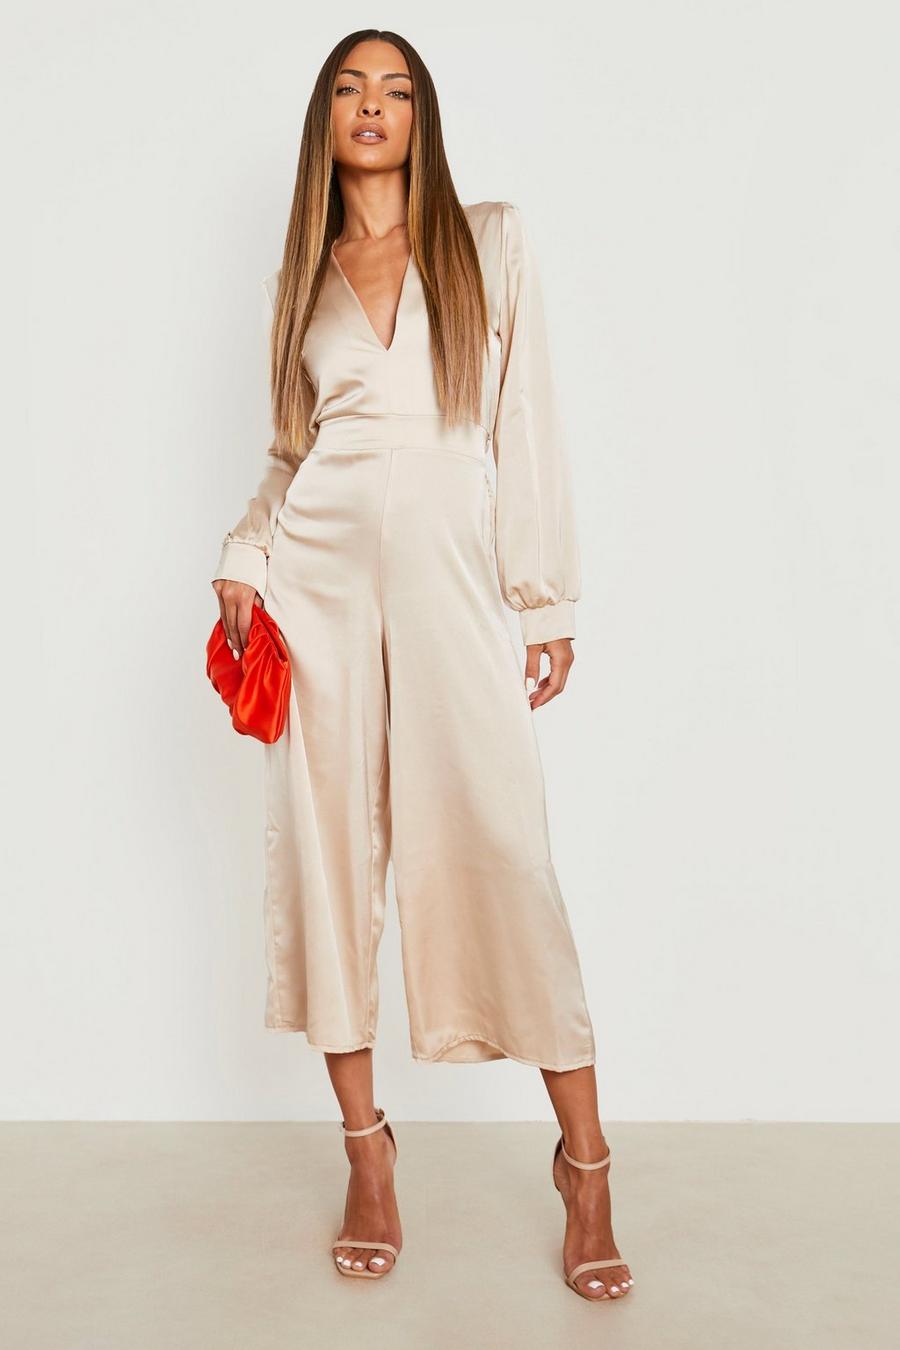 Champagne beis Volume Sleeve Satin Culotte Jumpsuit